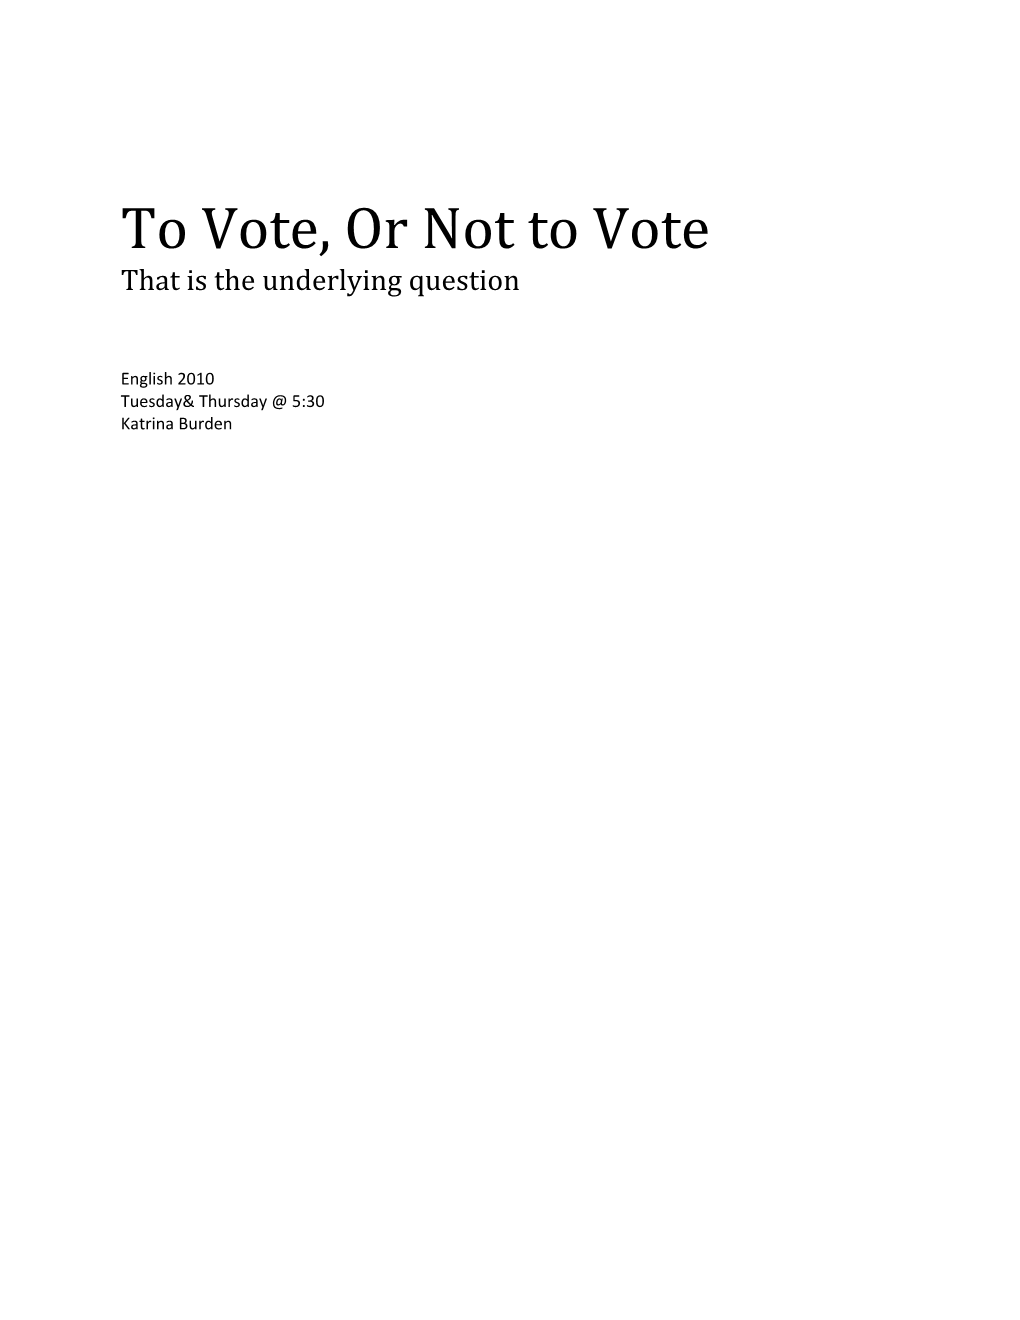 To Vote, Or Not to Vote